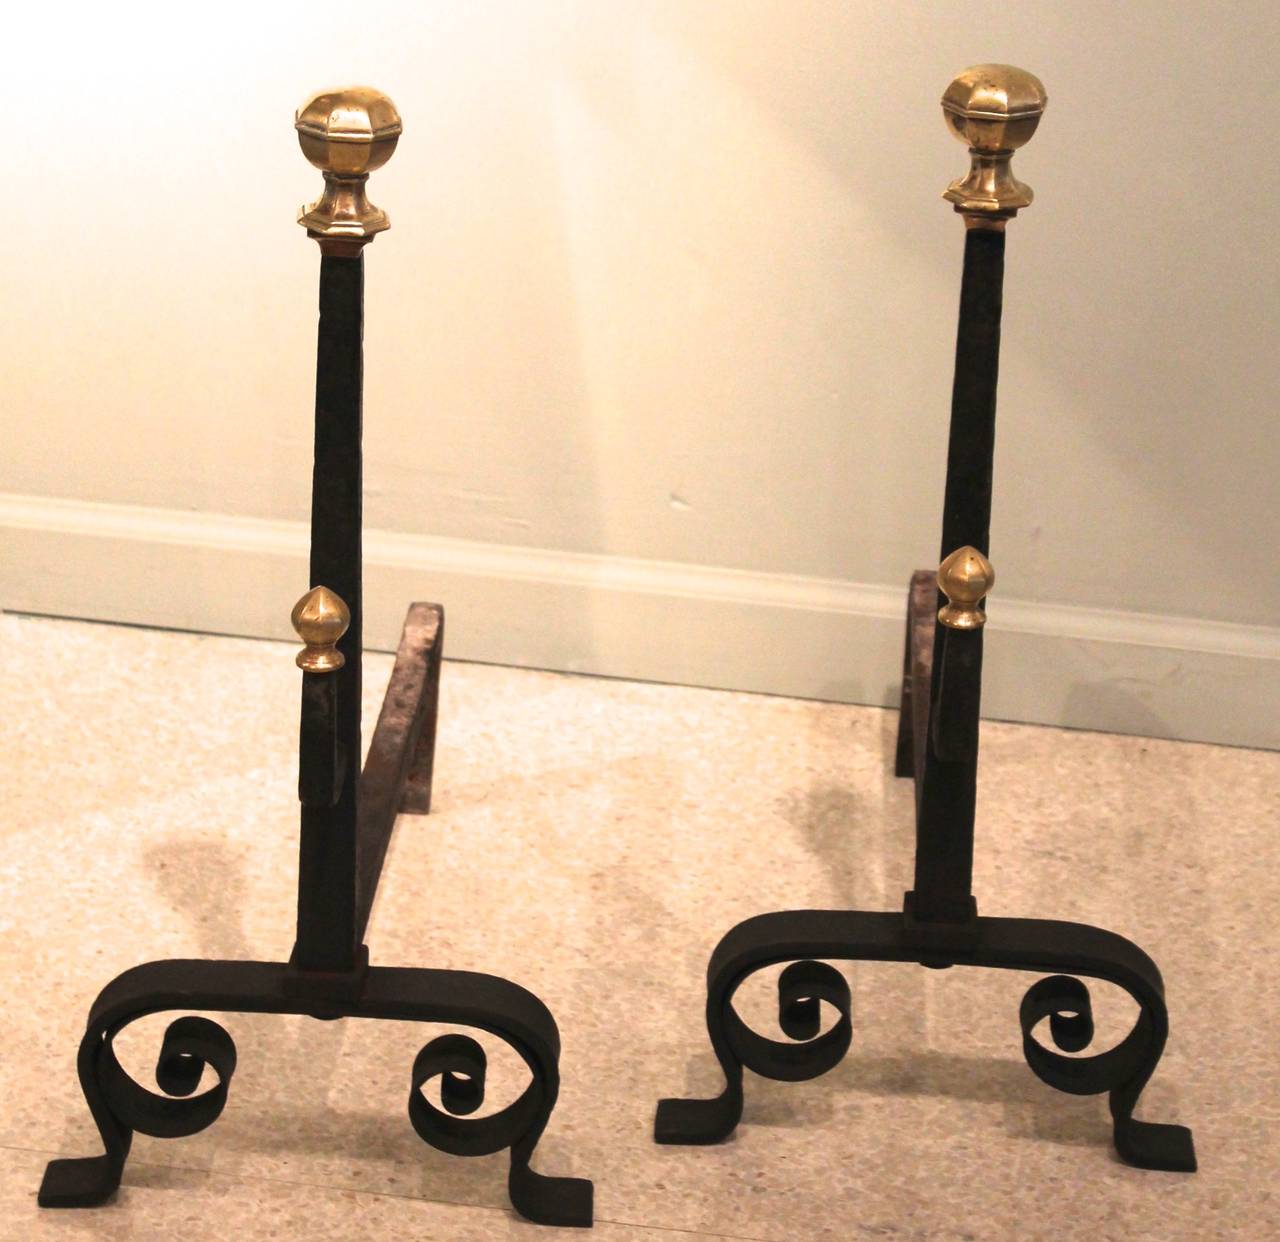 English Pair of Wrought Iron and Brass Andirons, Arts and Crafts Period